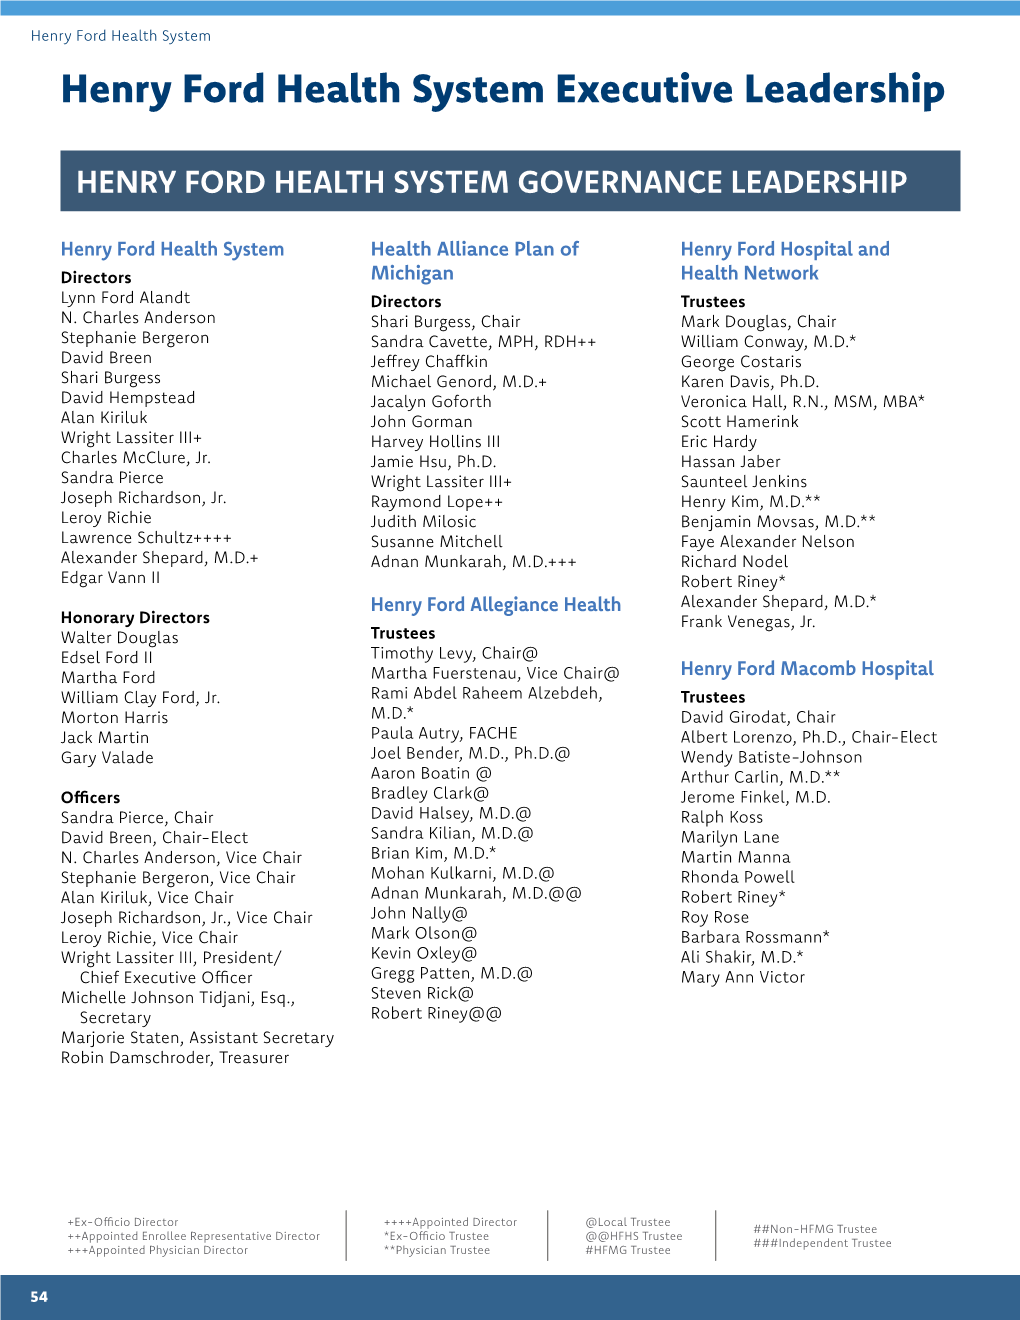 Henry Ford Health System Executive Leadership